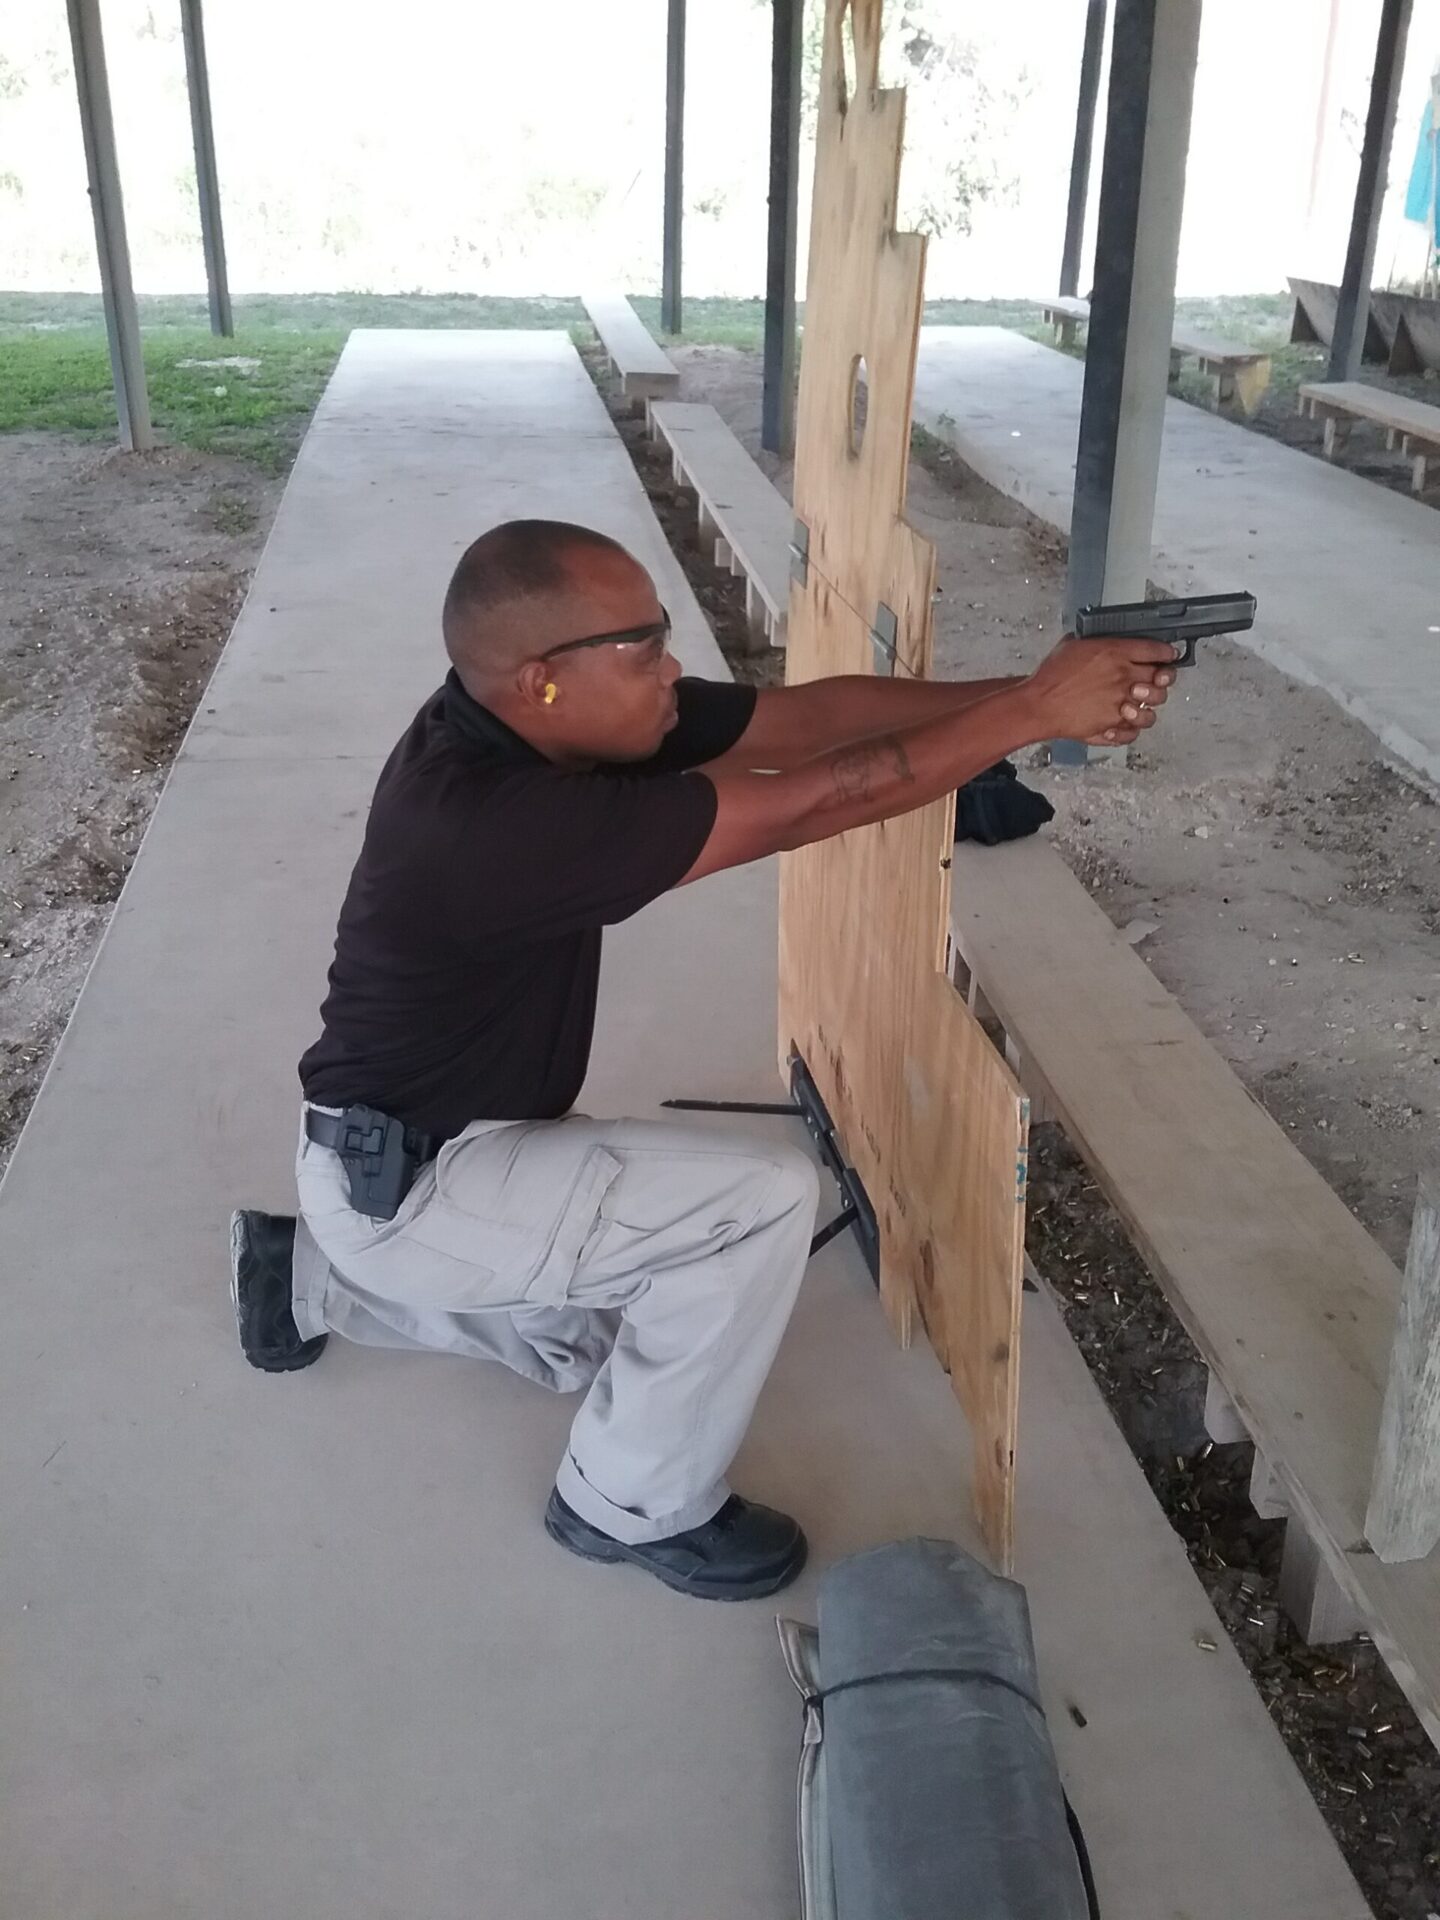 The second of a two part course for NRA Firearms Instructor certification for Basic Pistol.